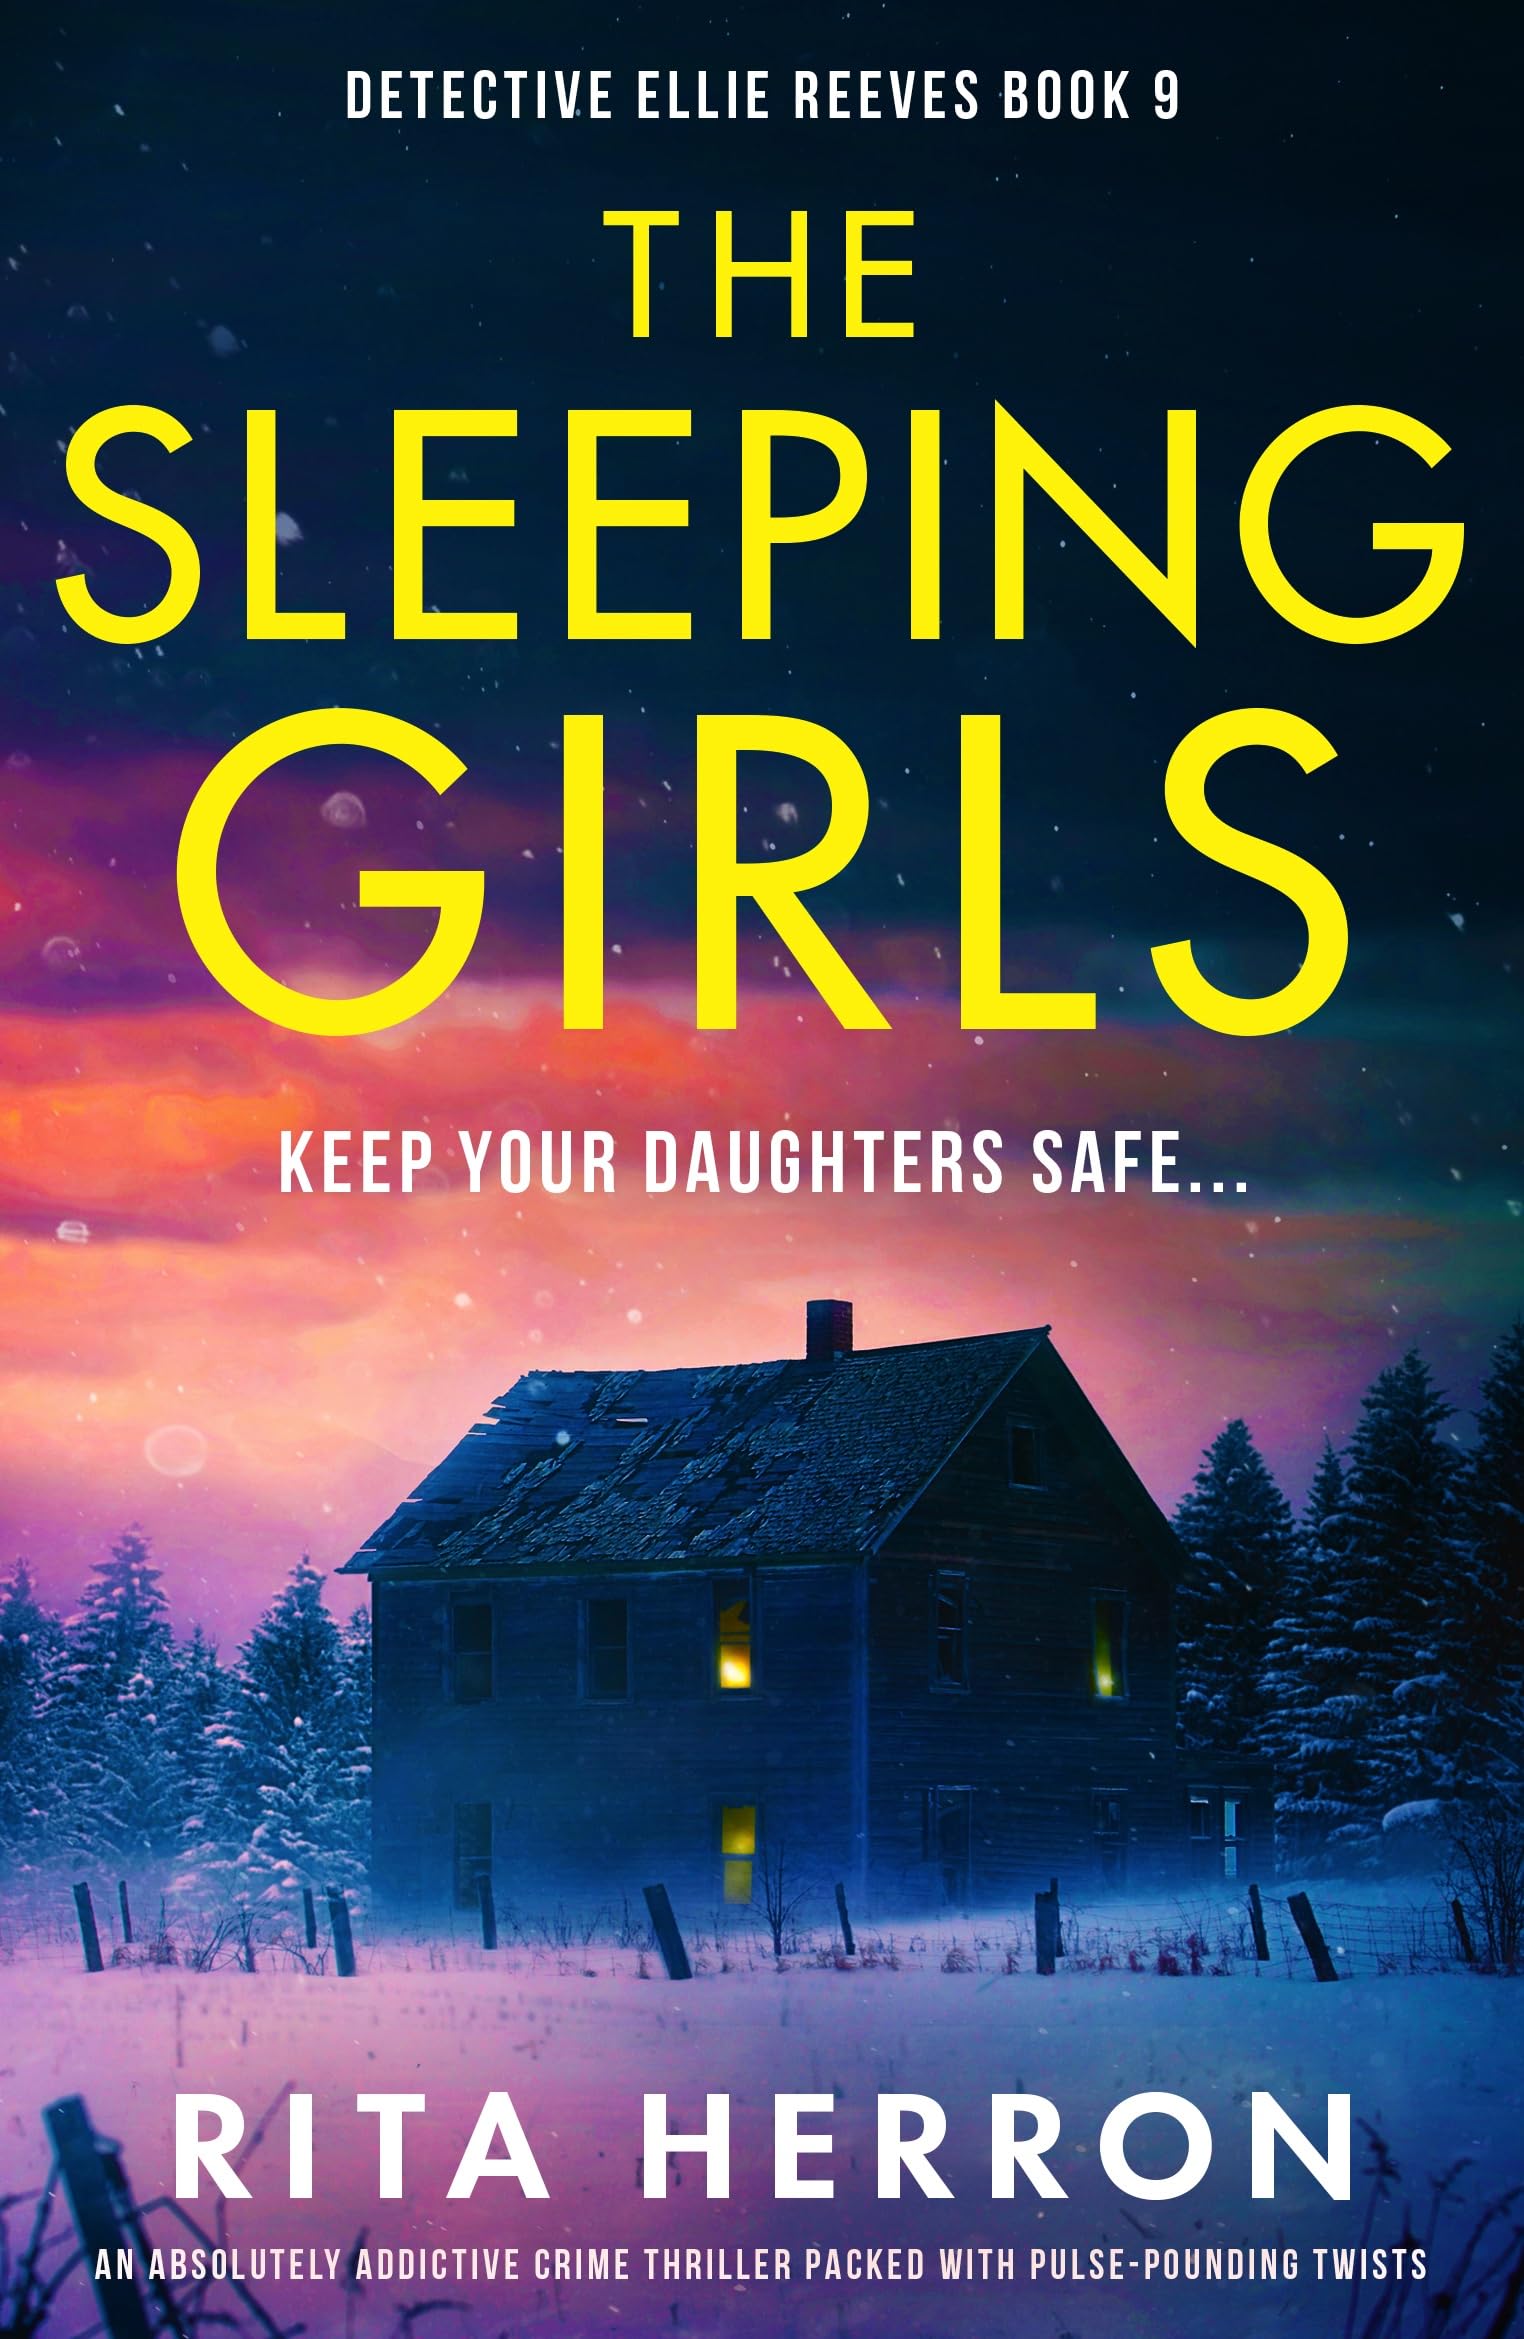 The Sleeping Girls : An absolutely addictive crime thriller packed with pulse-pounding twists (Detective Ellie Reeves Book 9)